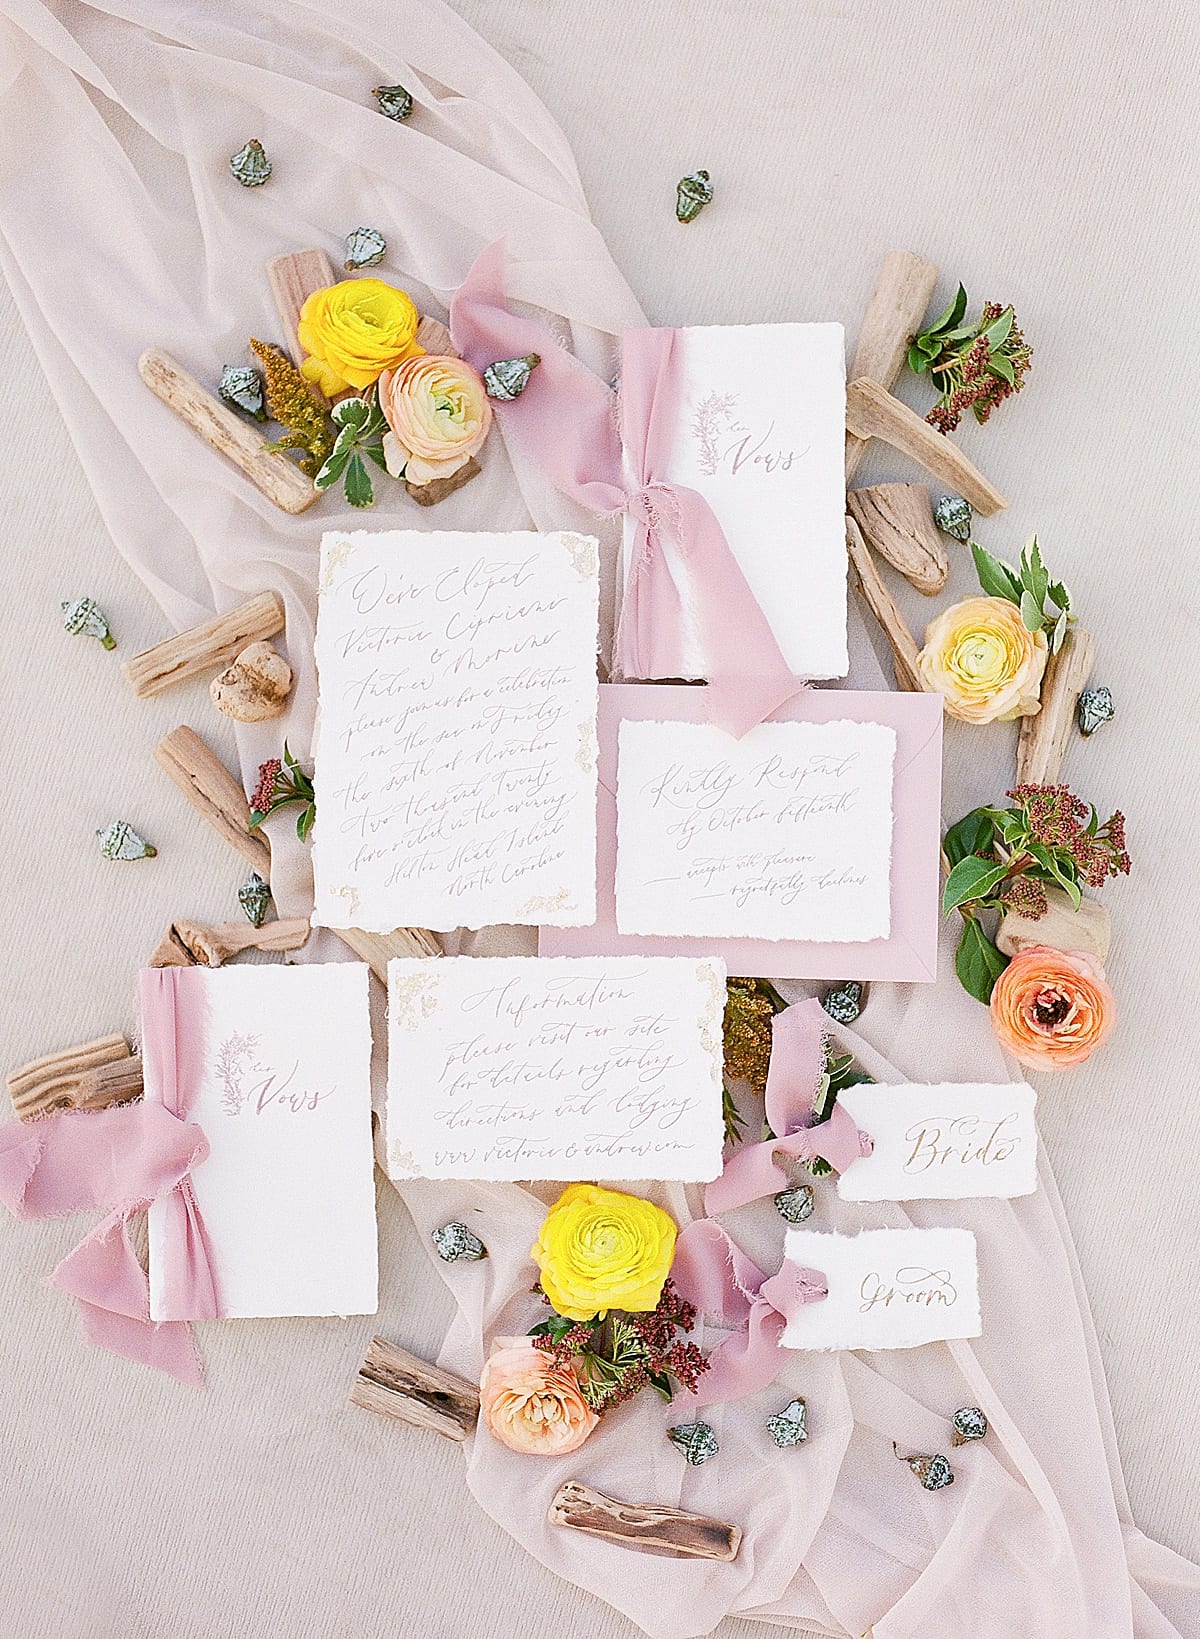 Wedding Invitation Suite Flat Lay with Drift Wood and Flowers Photo